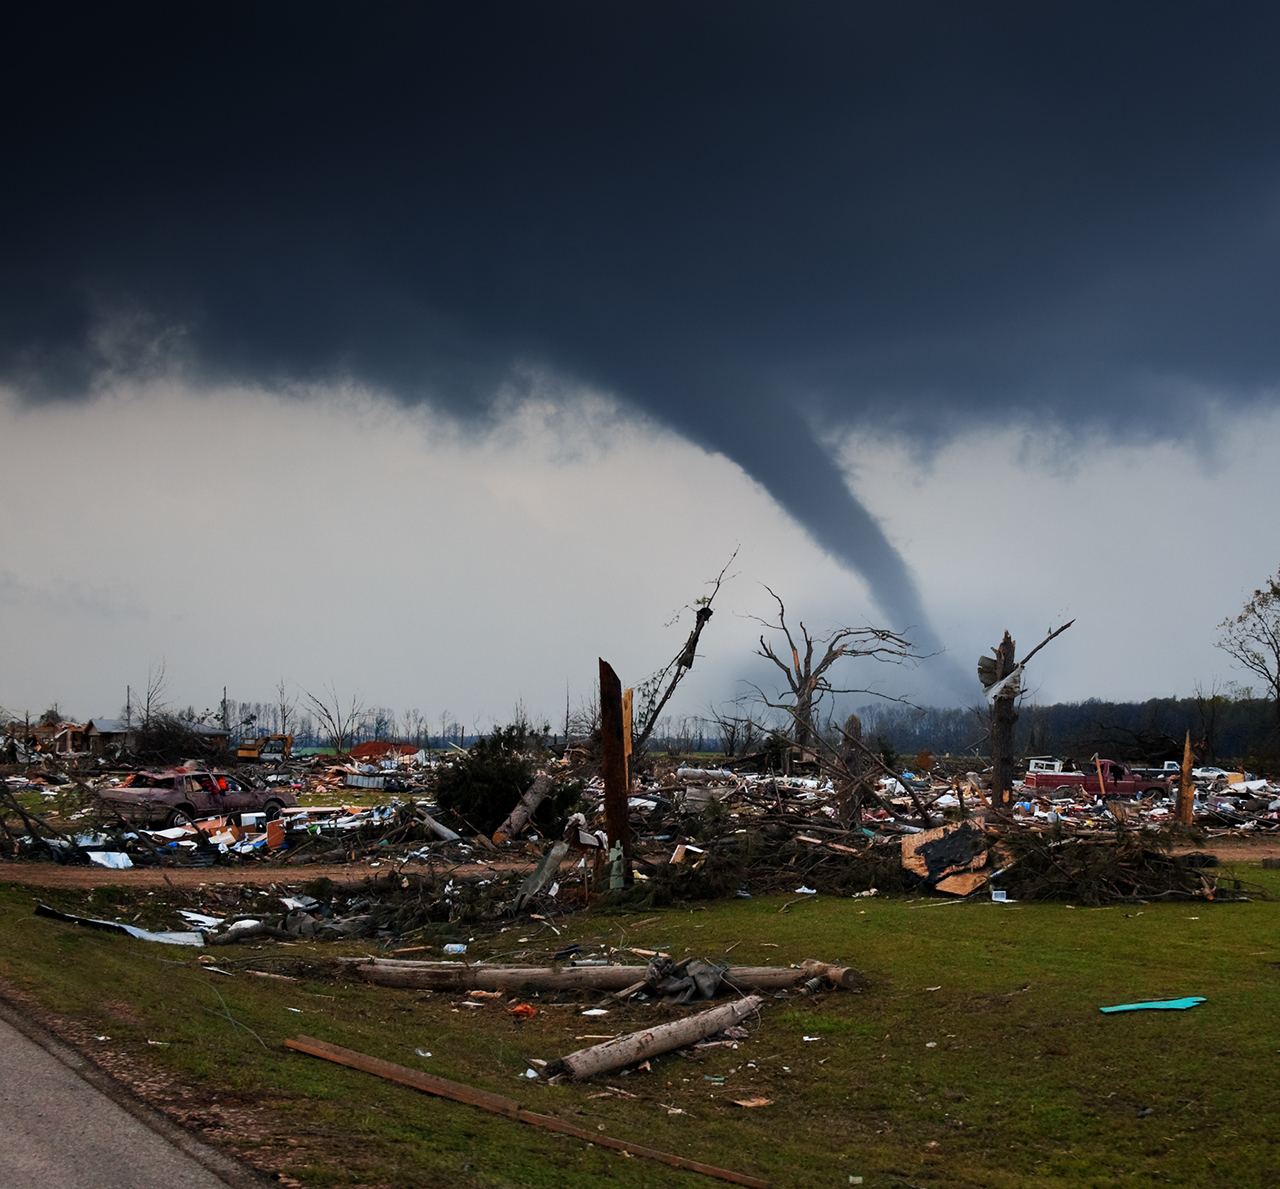 A tornado on the ground shortly after destroying a small neighborhood.